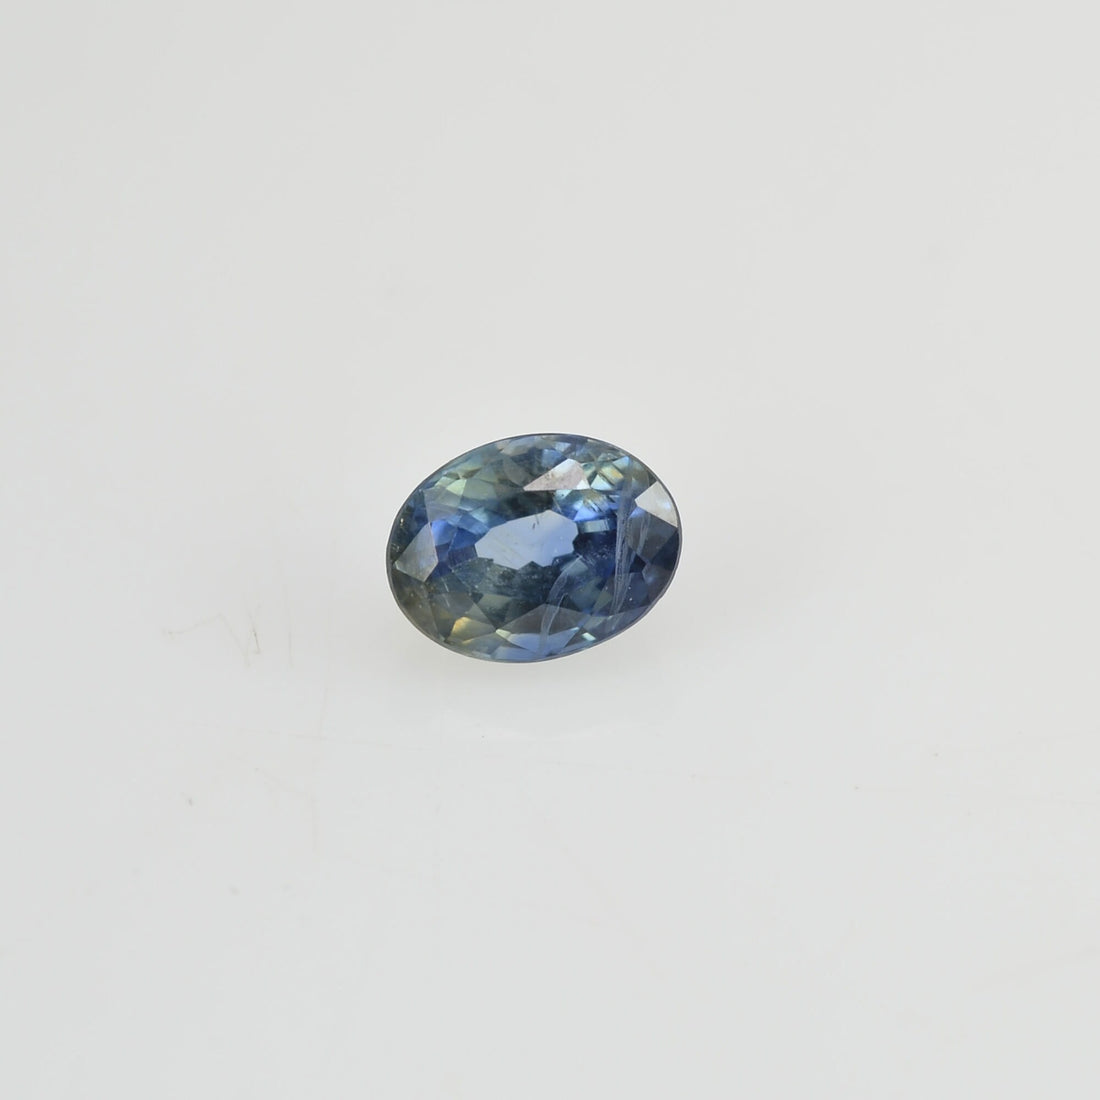 0.29 Cts Natural Teal Blue Green Sapphire Loose Gemstone Oval Cut